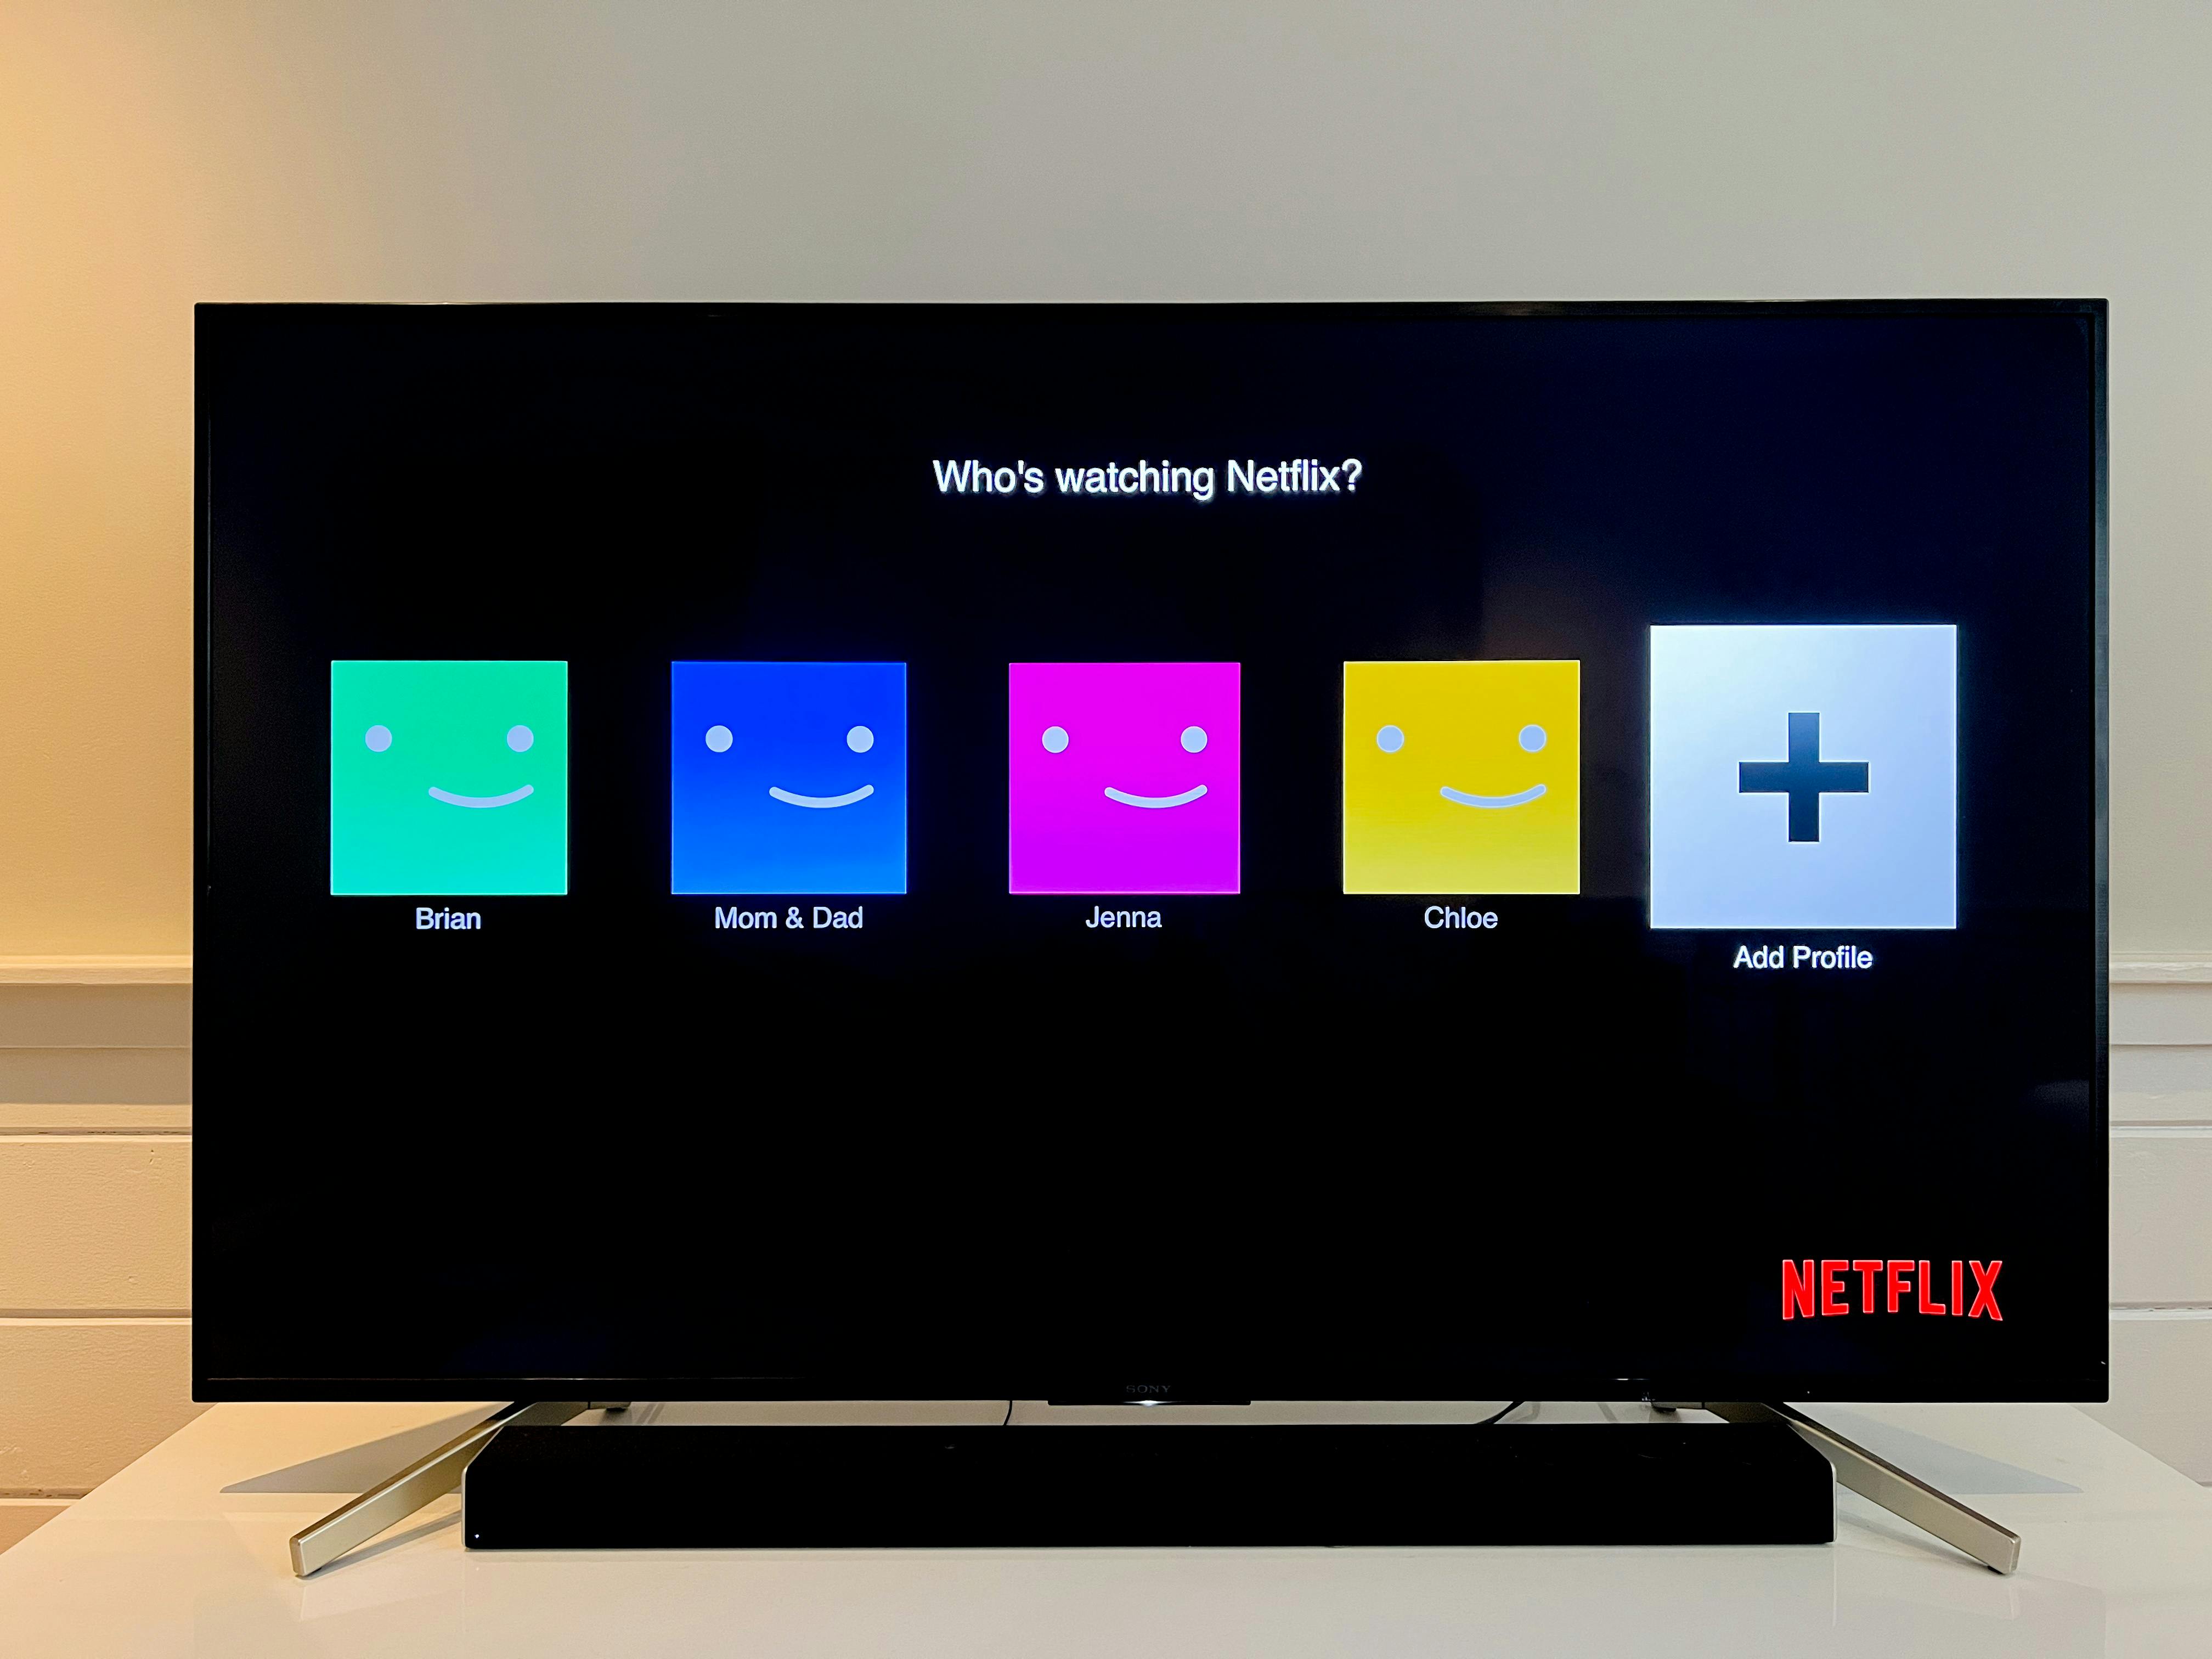 TV screen showing the Netflix app open on the profiles page asking "Who's watching Netflix?